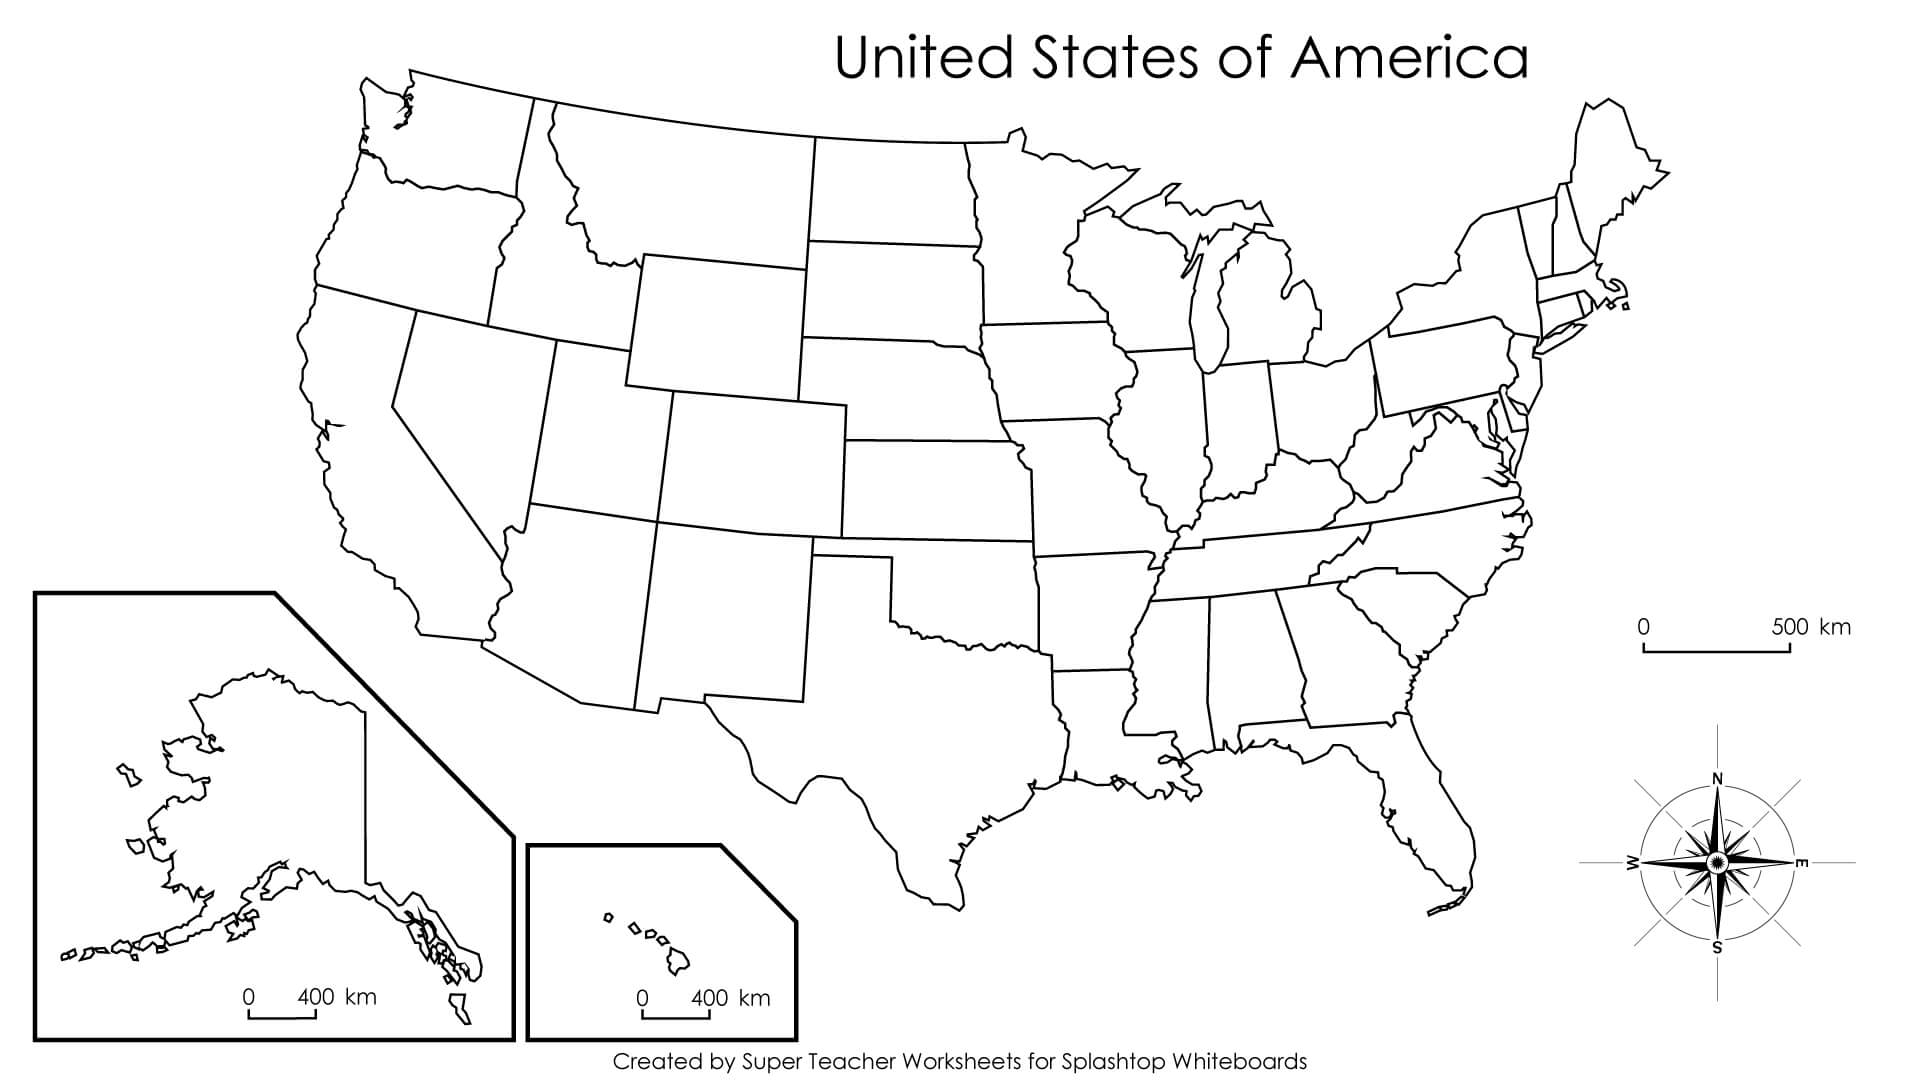 Splashtop Whiteboard Background Graphics Intended For Blank Template Of The United States